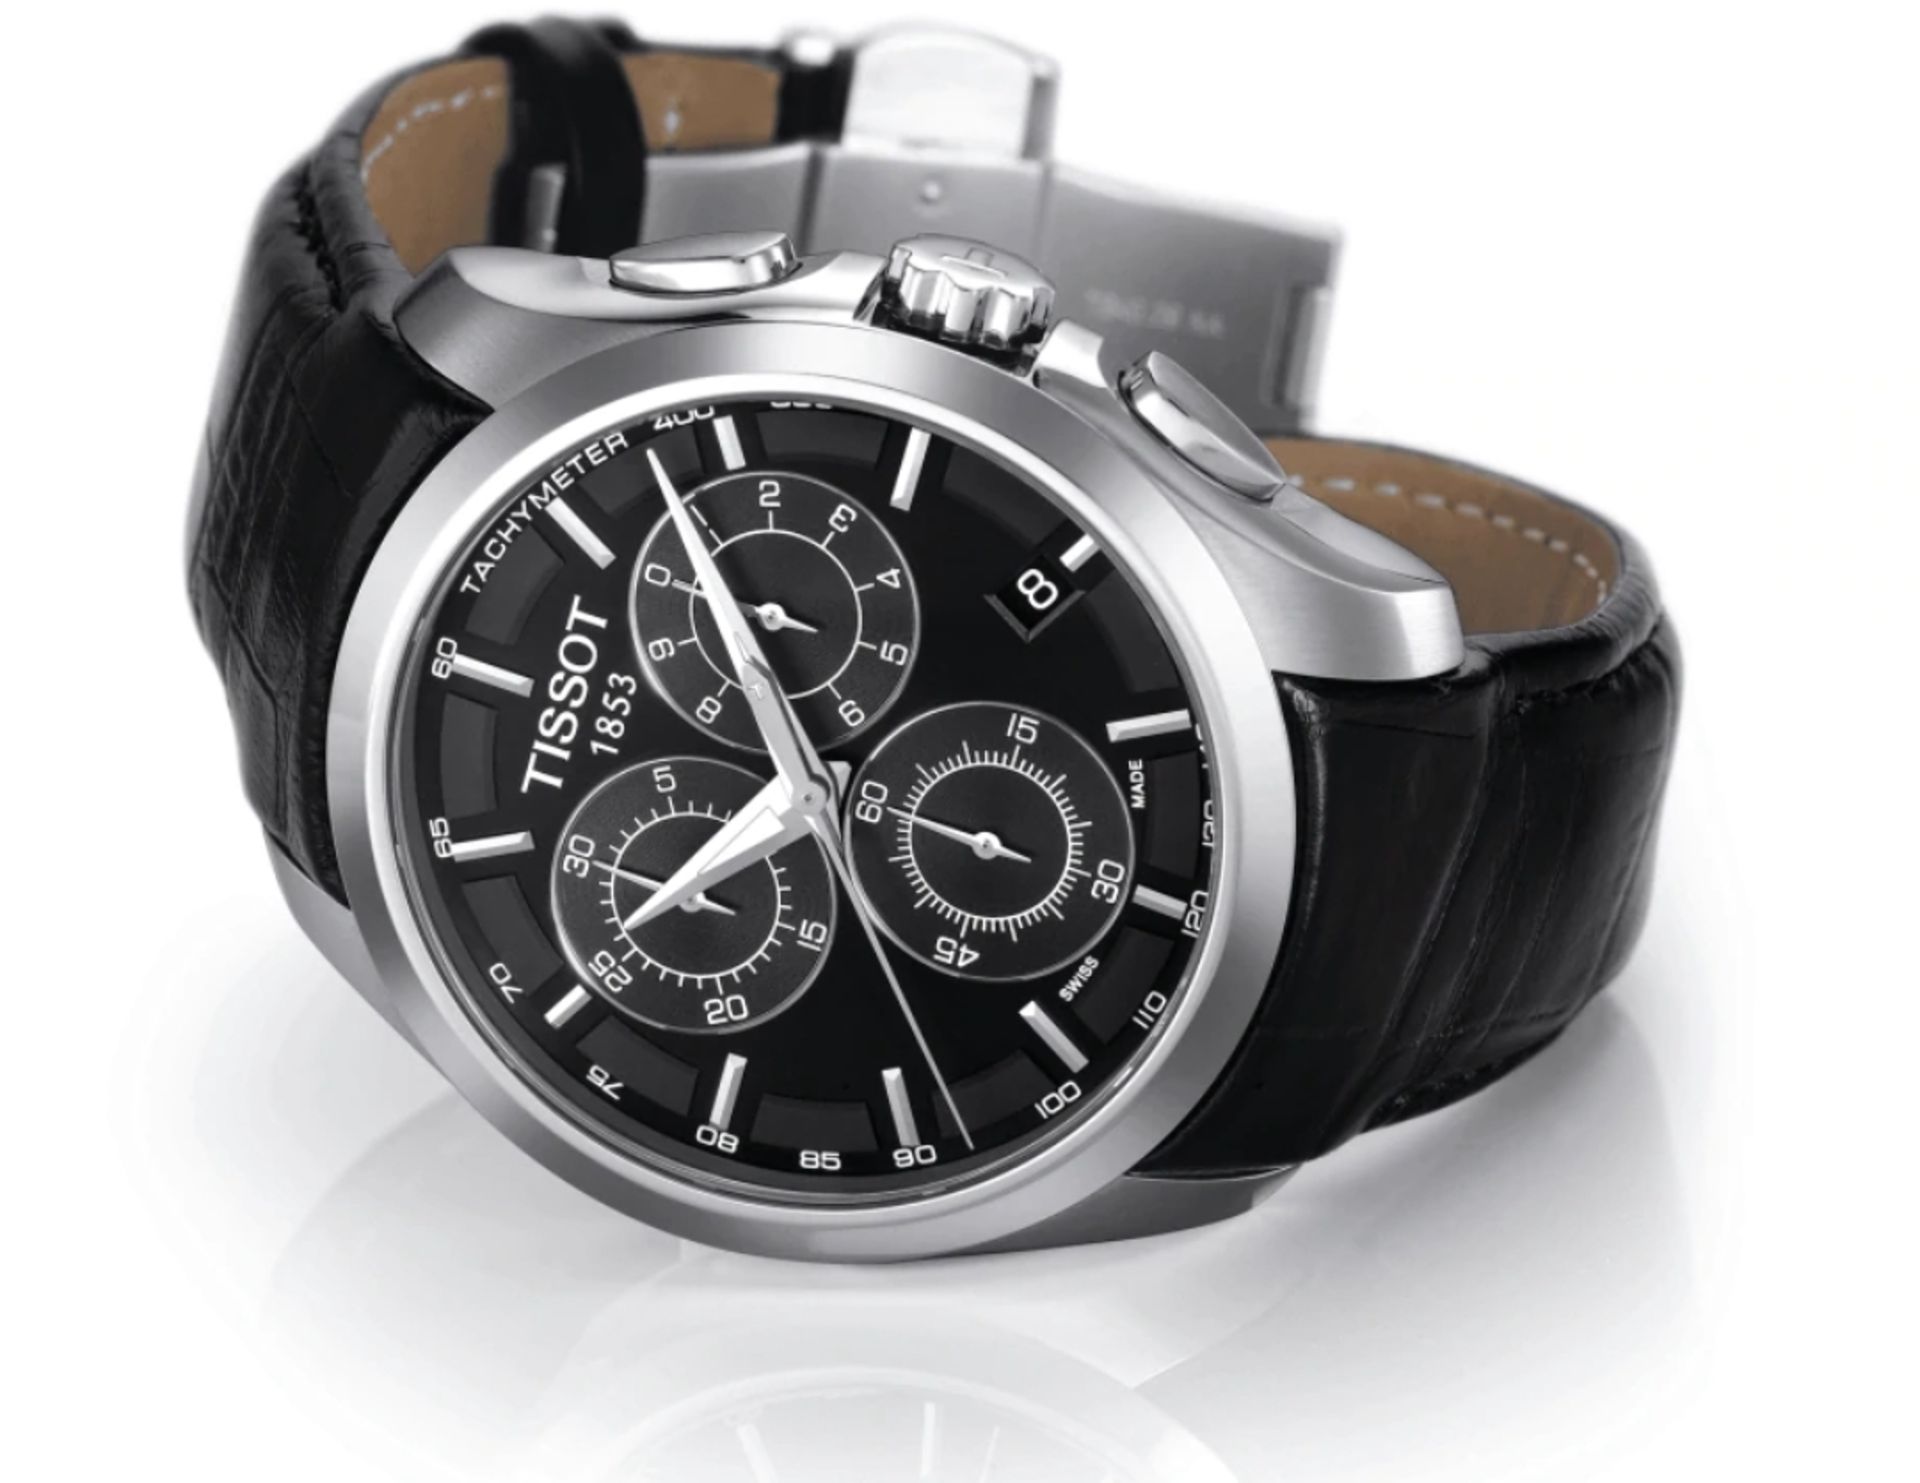 Tissot T-Trend Couturier T035.617.16.051.00 Chronograph Watch For Men - Image 7 of 11